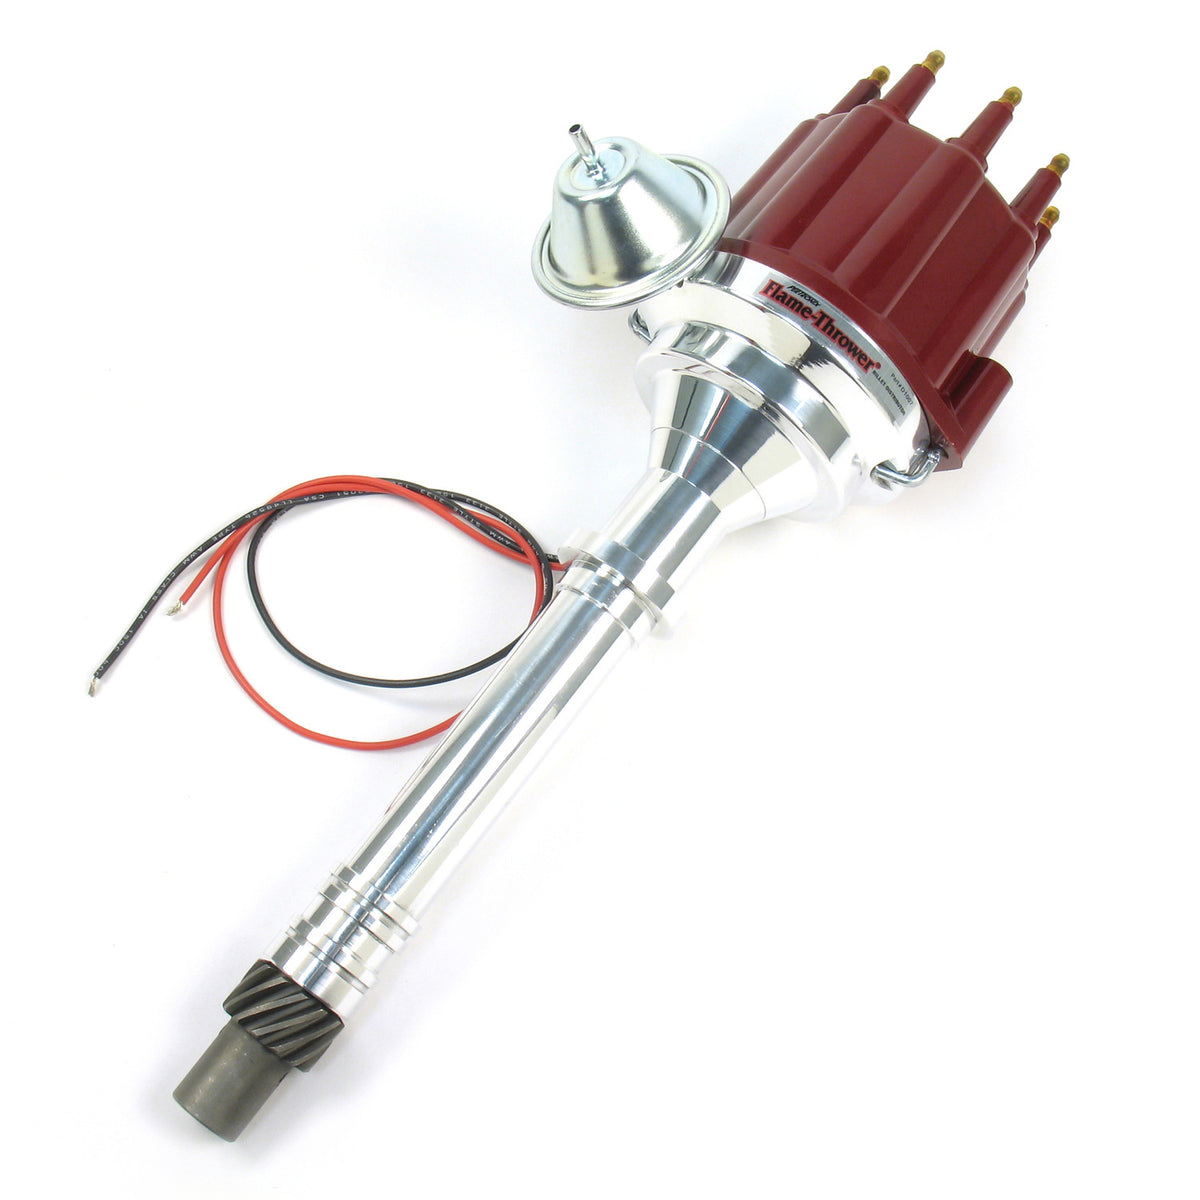 PerTronix D100711 Flame-Thrower Electronic Distributor Billet Chevrolet  Small Block/Big Block Plug and Play with Ignitor II Technology Vacuum  Advance